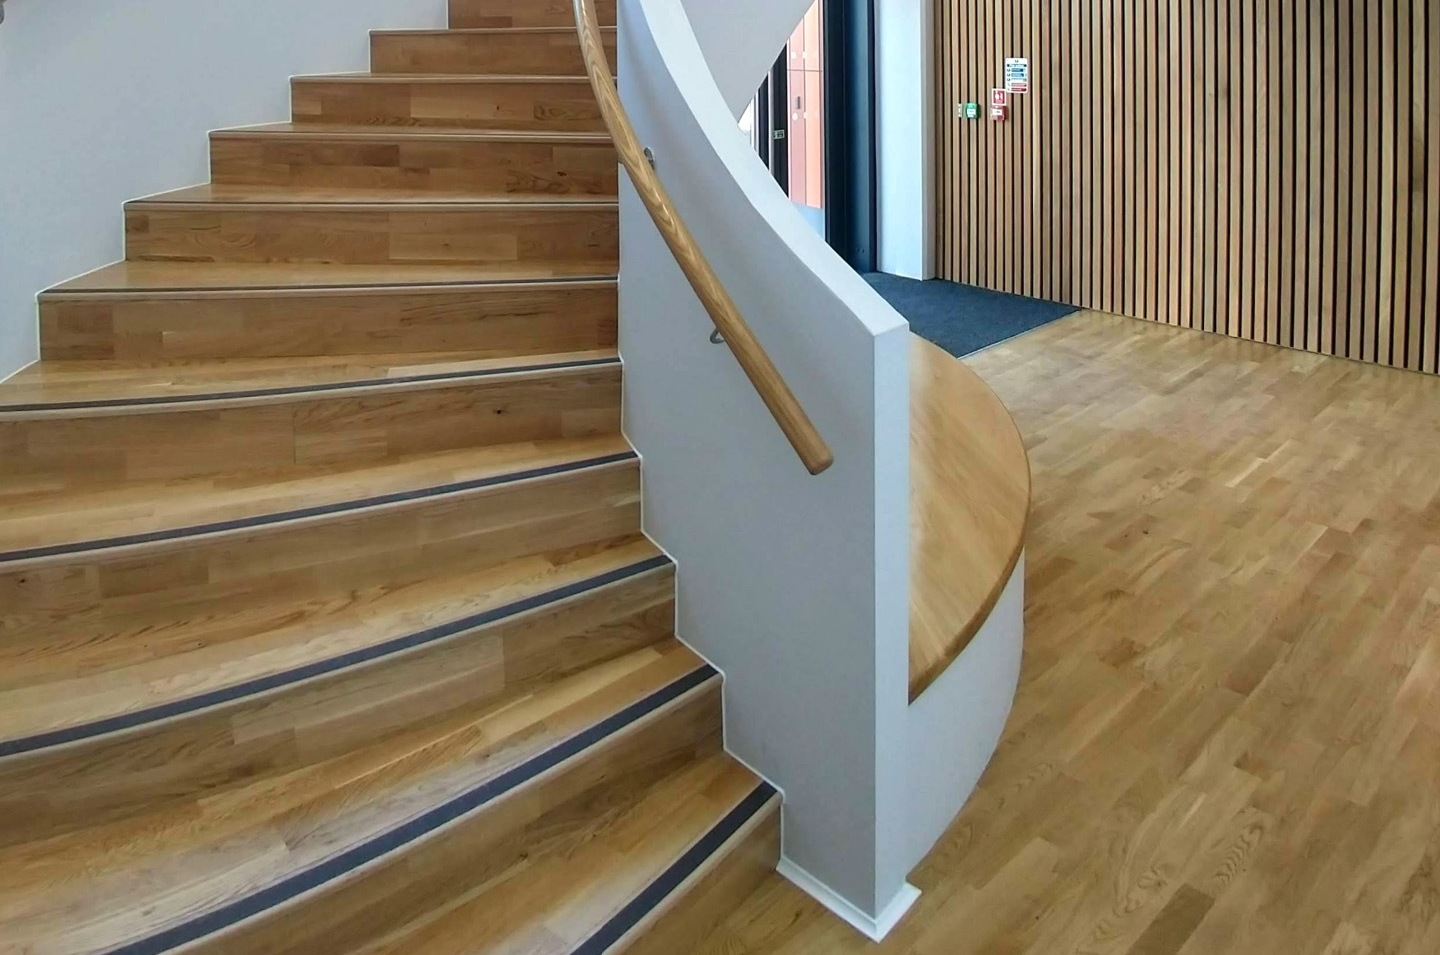 St Helen's School of Music - Internal photo of curved stair